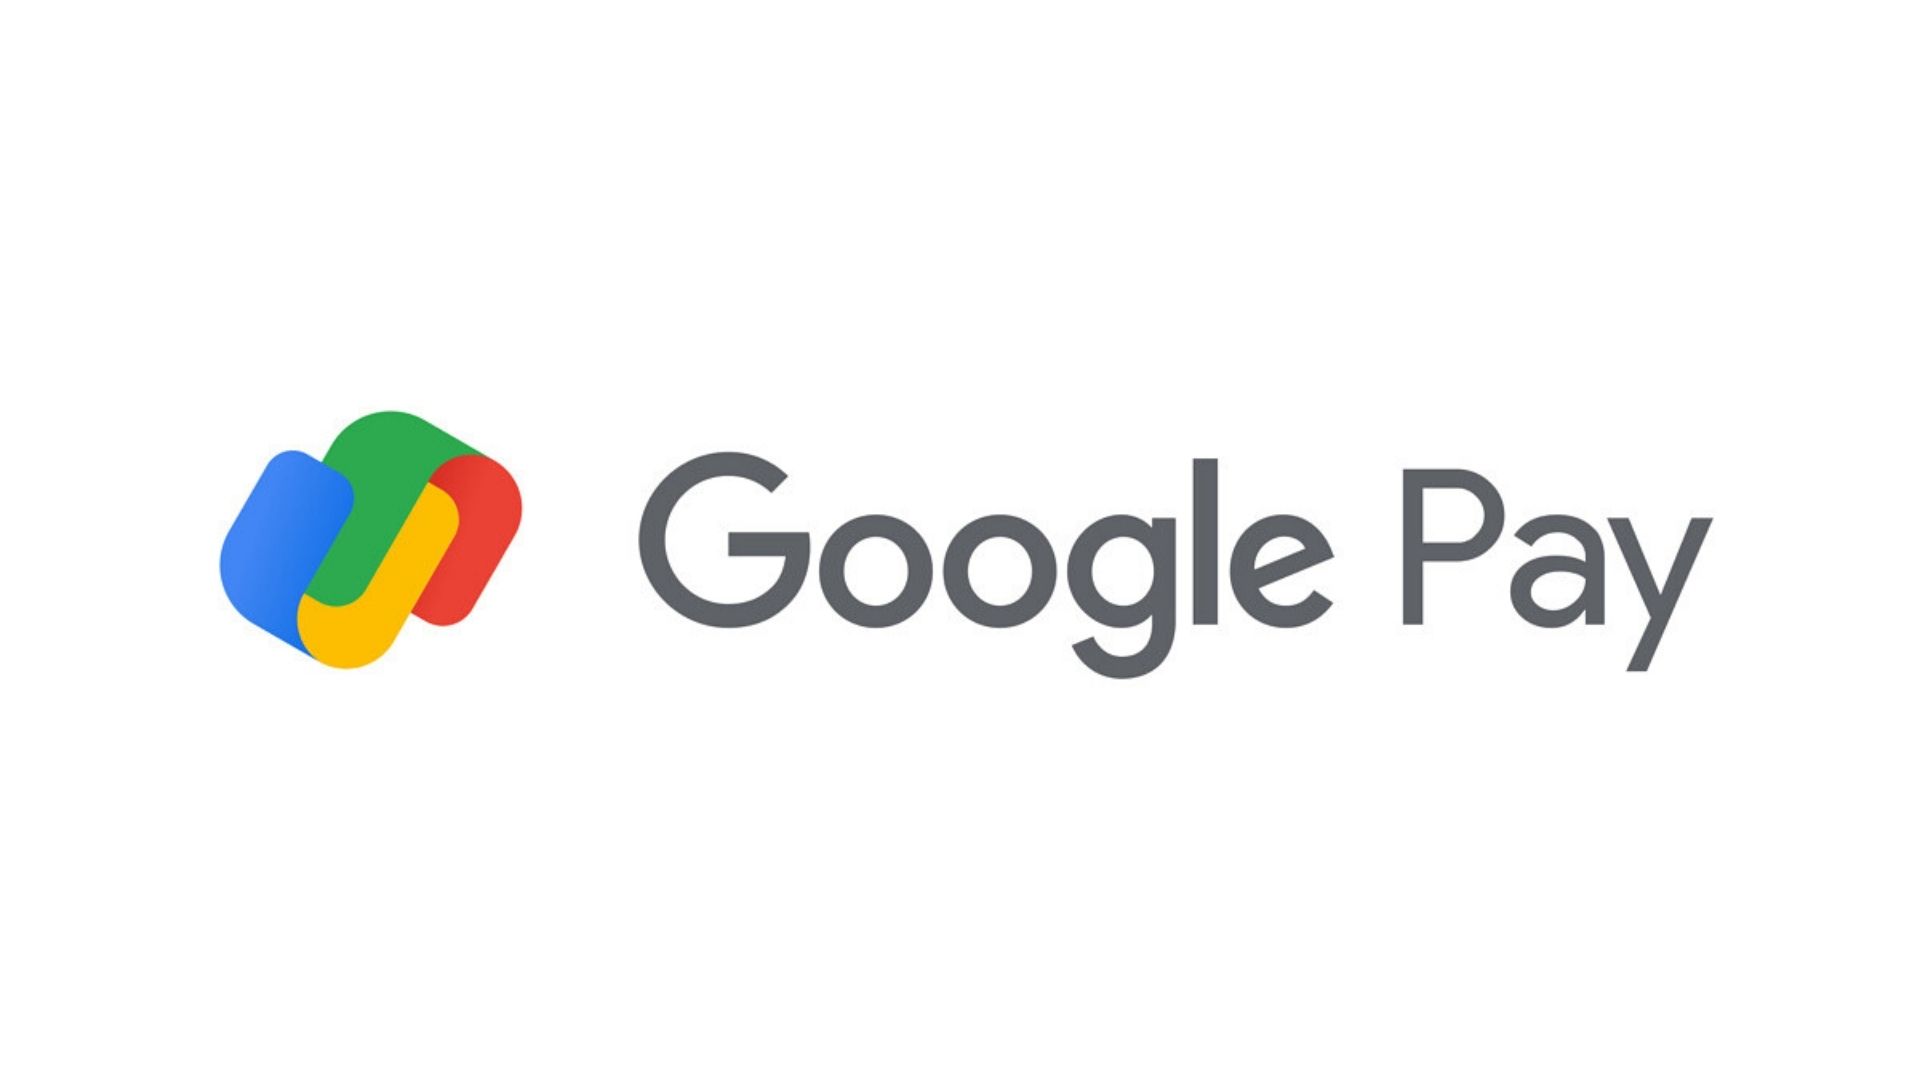 Arrangements to expand Google Pay